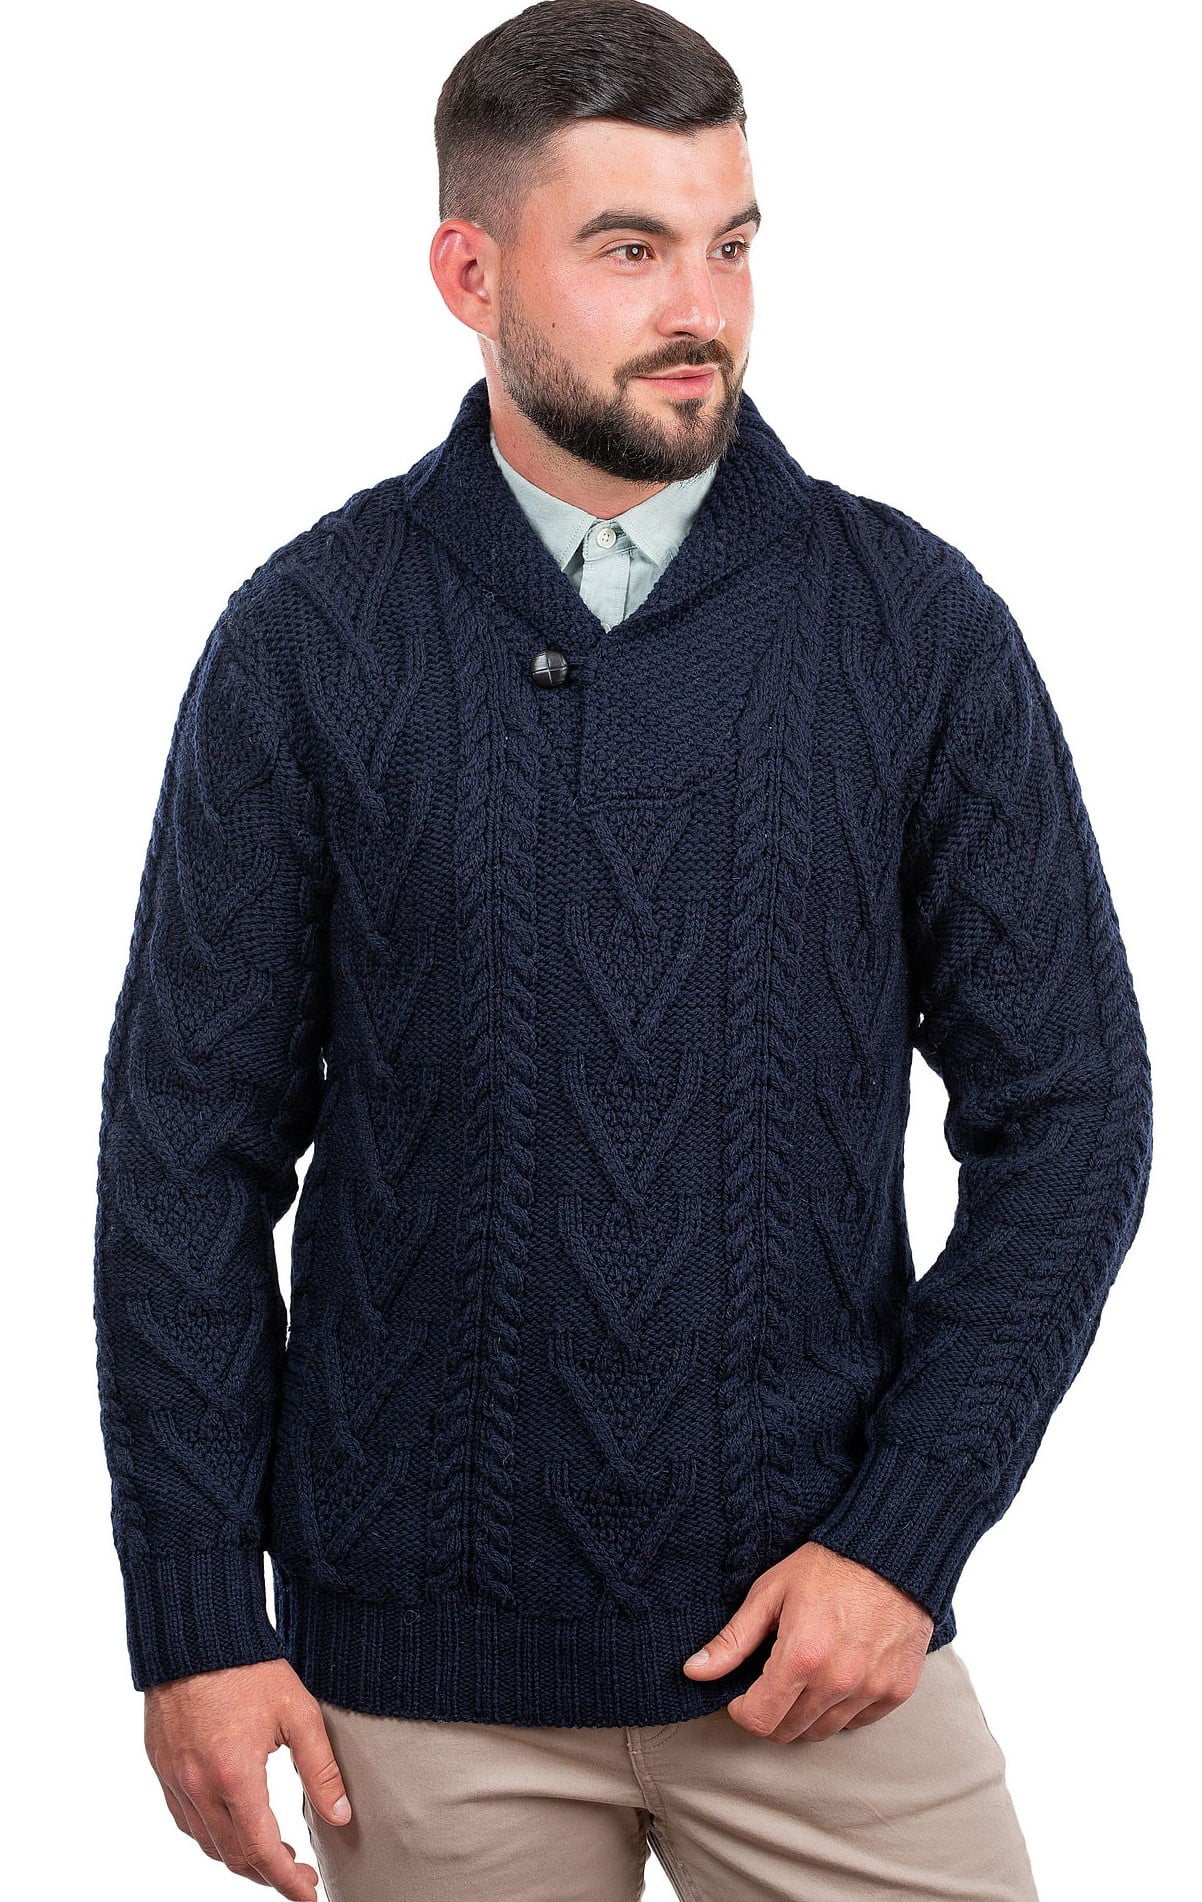 SAOL 100% Merino Wool Mens Aran Cable Knit Shawl Collar Casual Irish Cardigan with Buttons and Pockets 